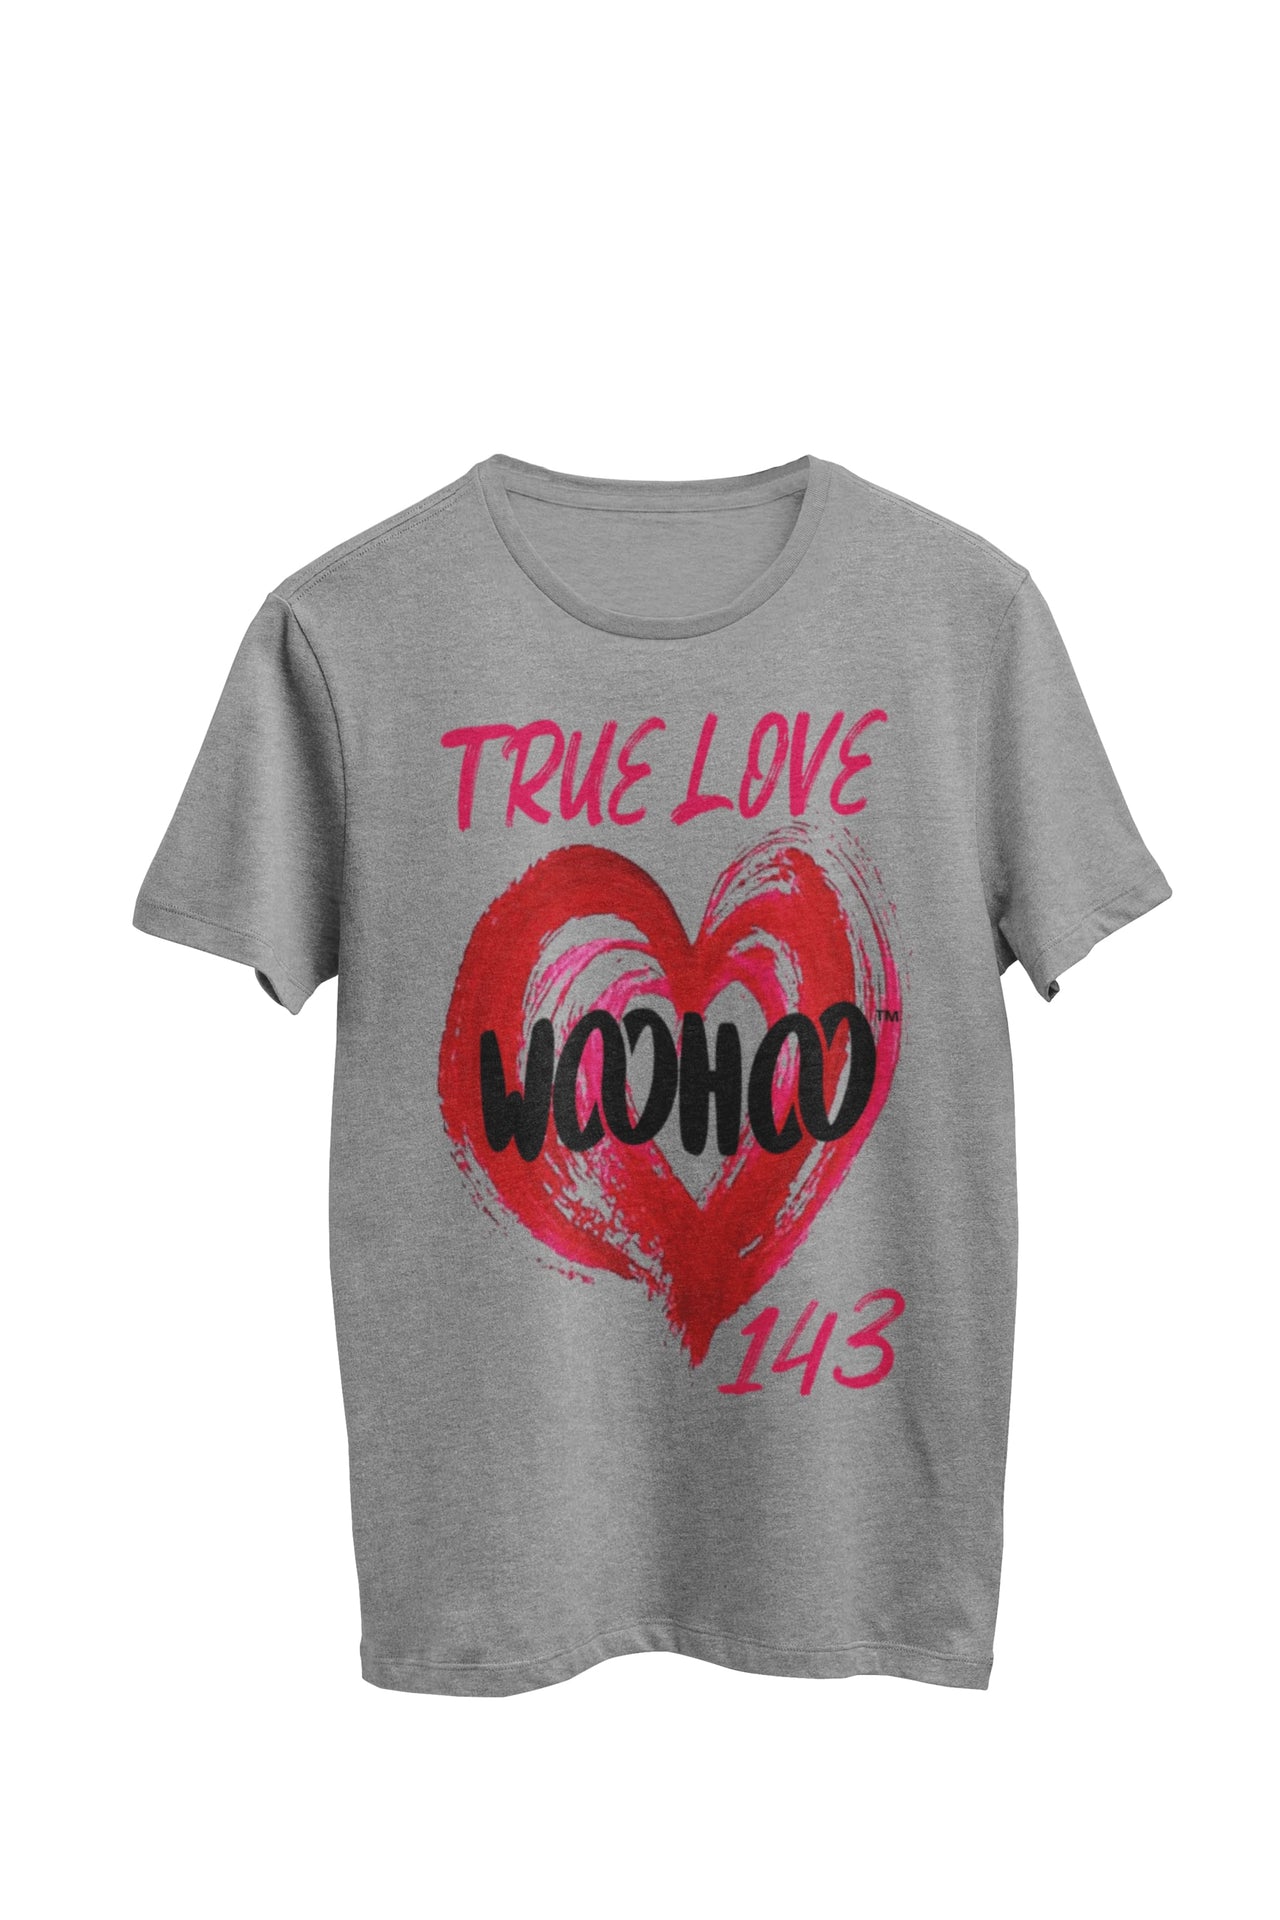 Gray heather unisex t-shirt featuring the texts 'True Love', '143', and 'woohoo' written on an artsy heart. Designed by WooHoo Apparel.